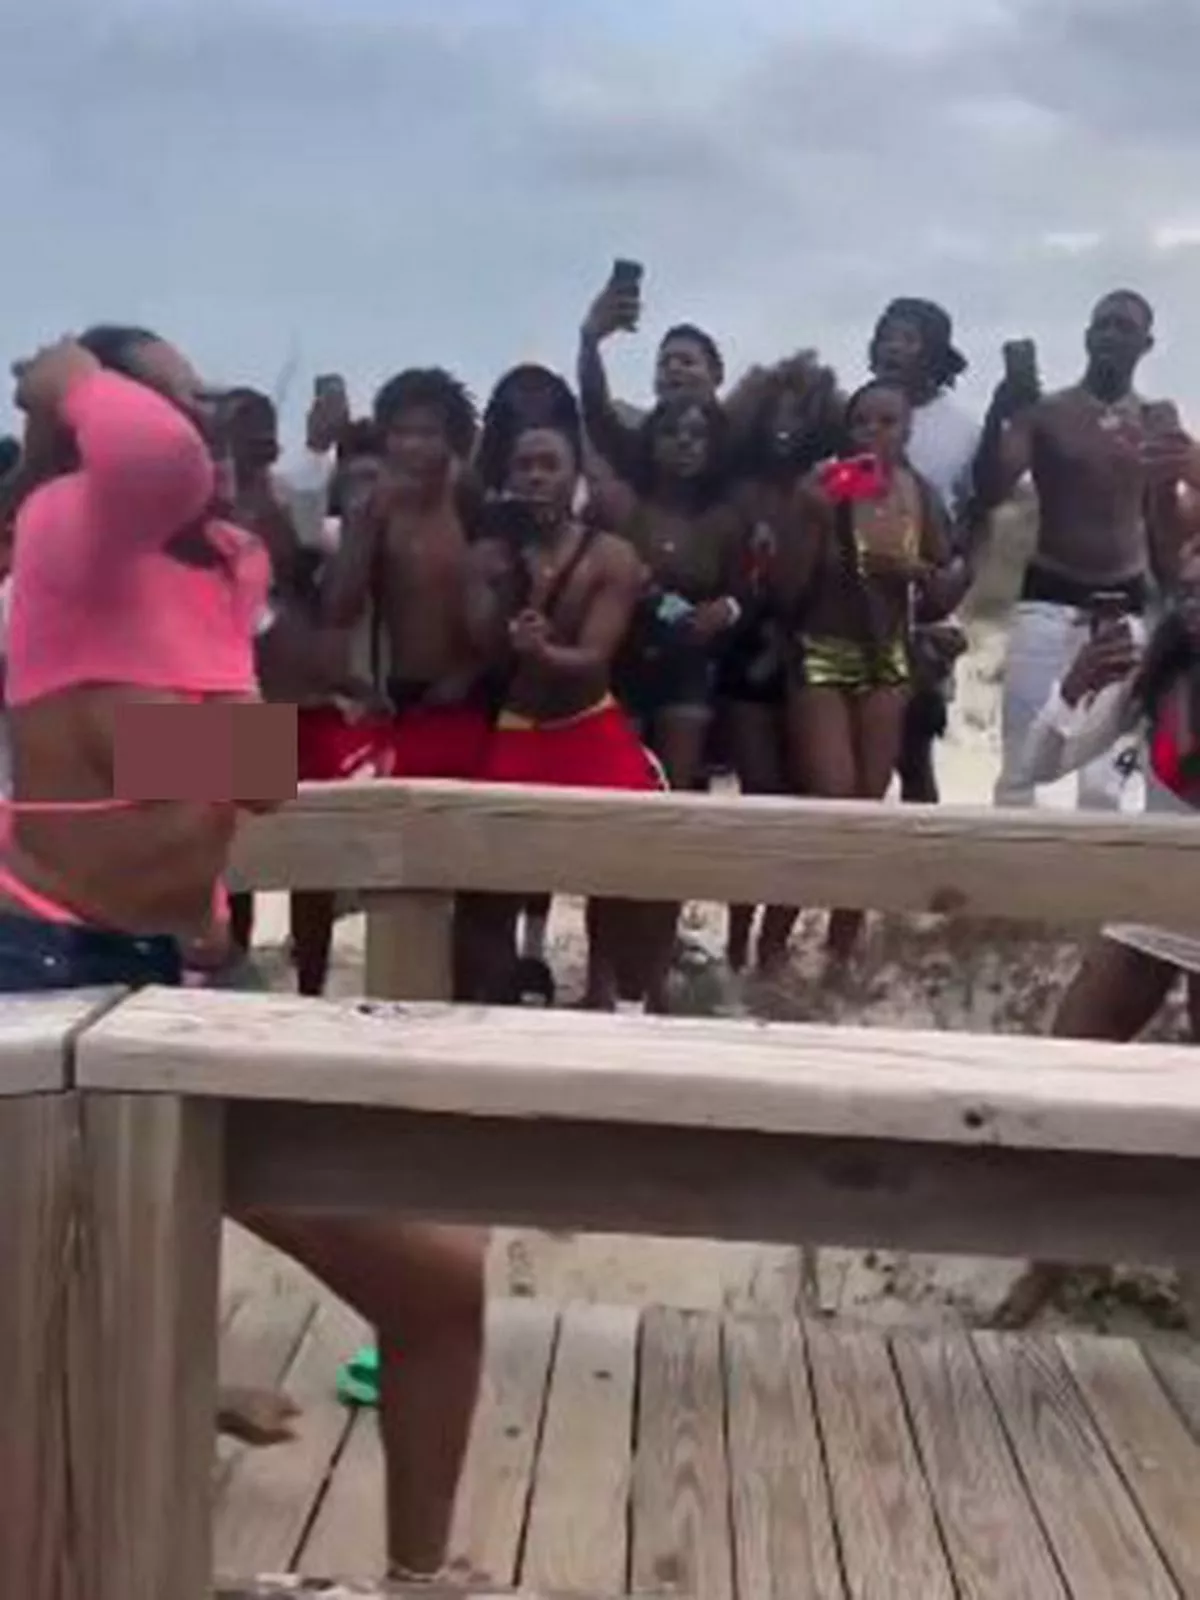 Breasts fall out of bikinis as women fight during spring break outing (photos/video)